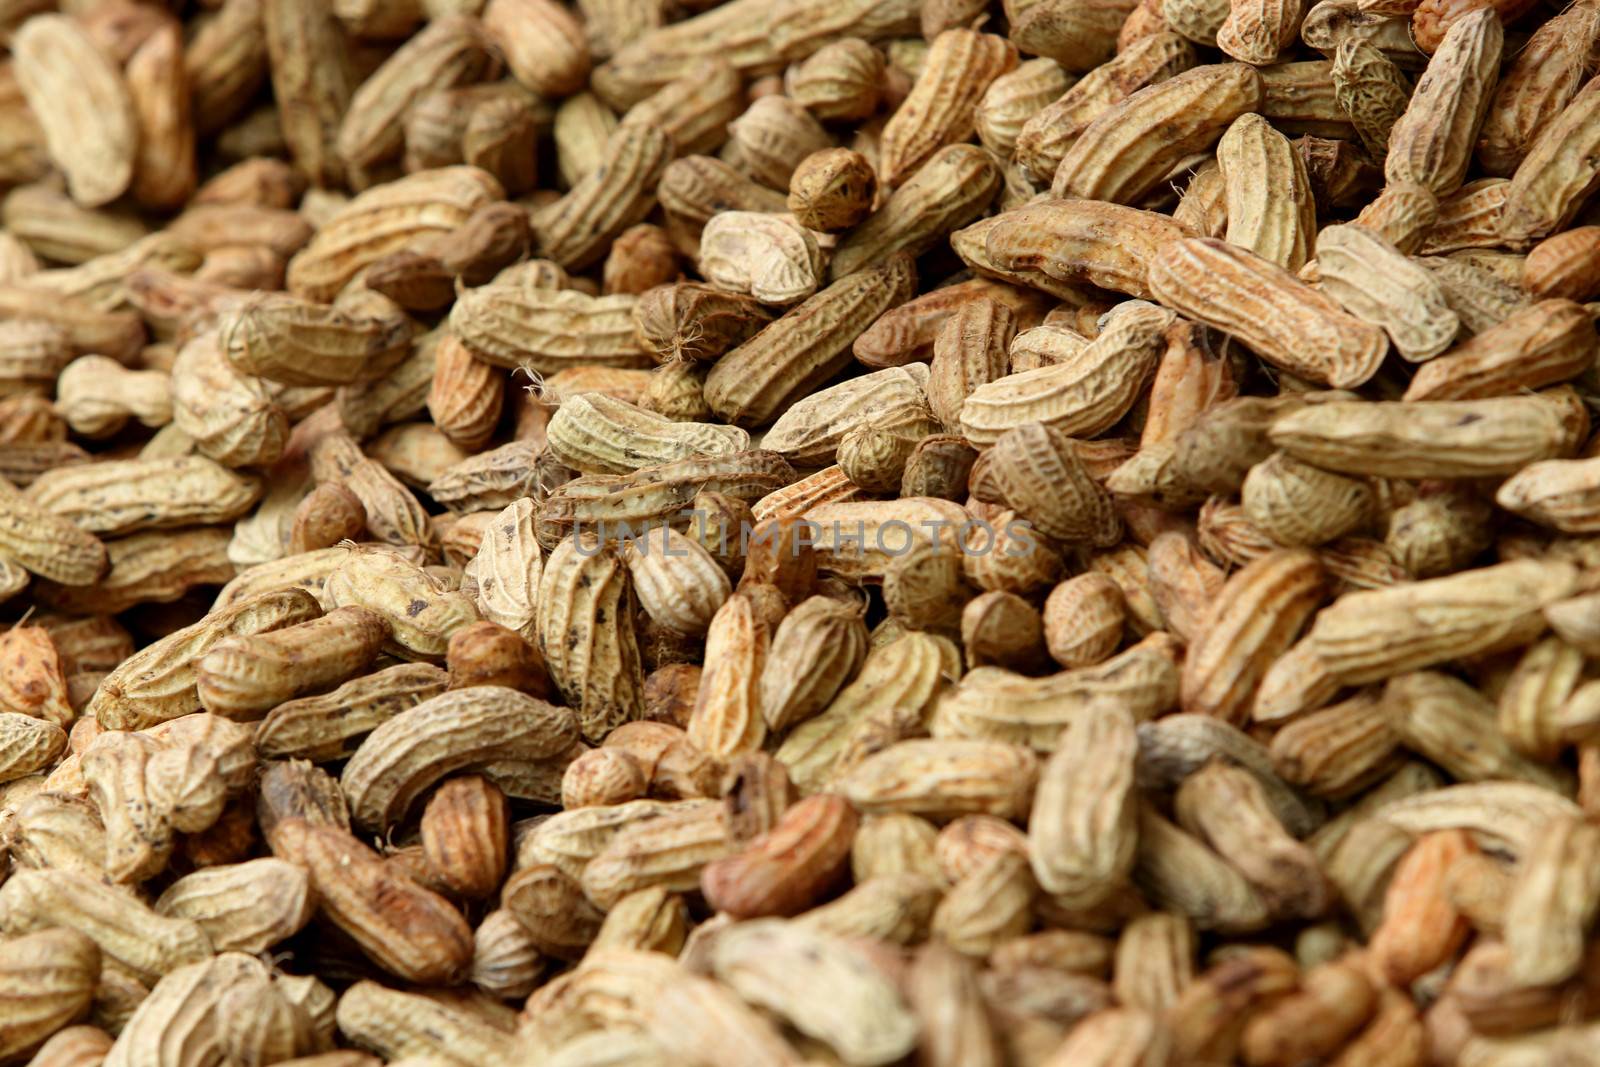 Boiled or steamed peanut seed